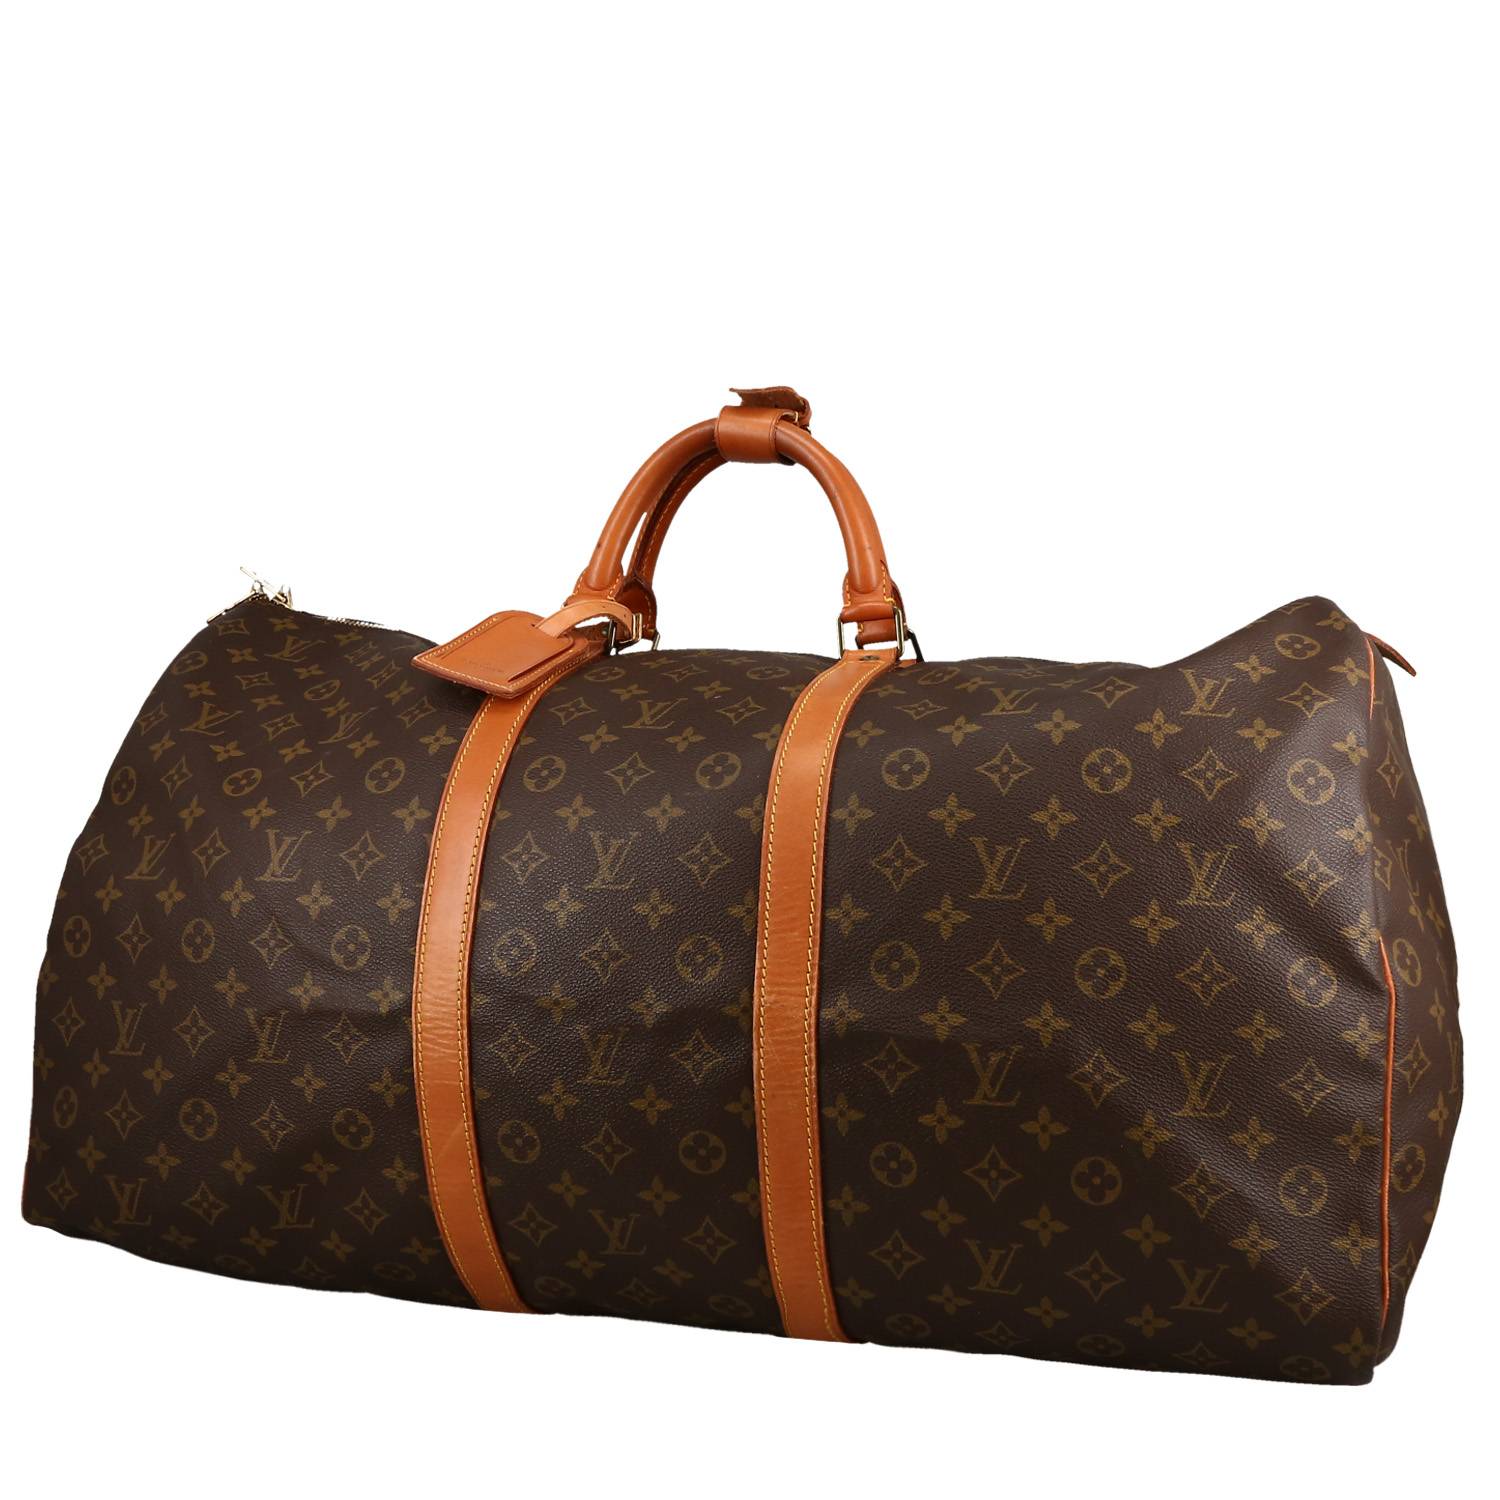 Louis Vuitton Keepall 60 cm Travel Bag in Brown Monogram Canvas and